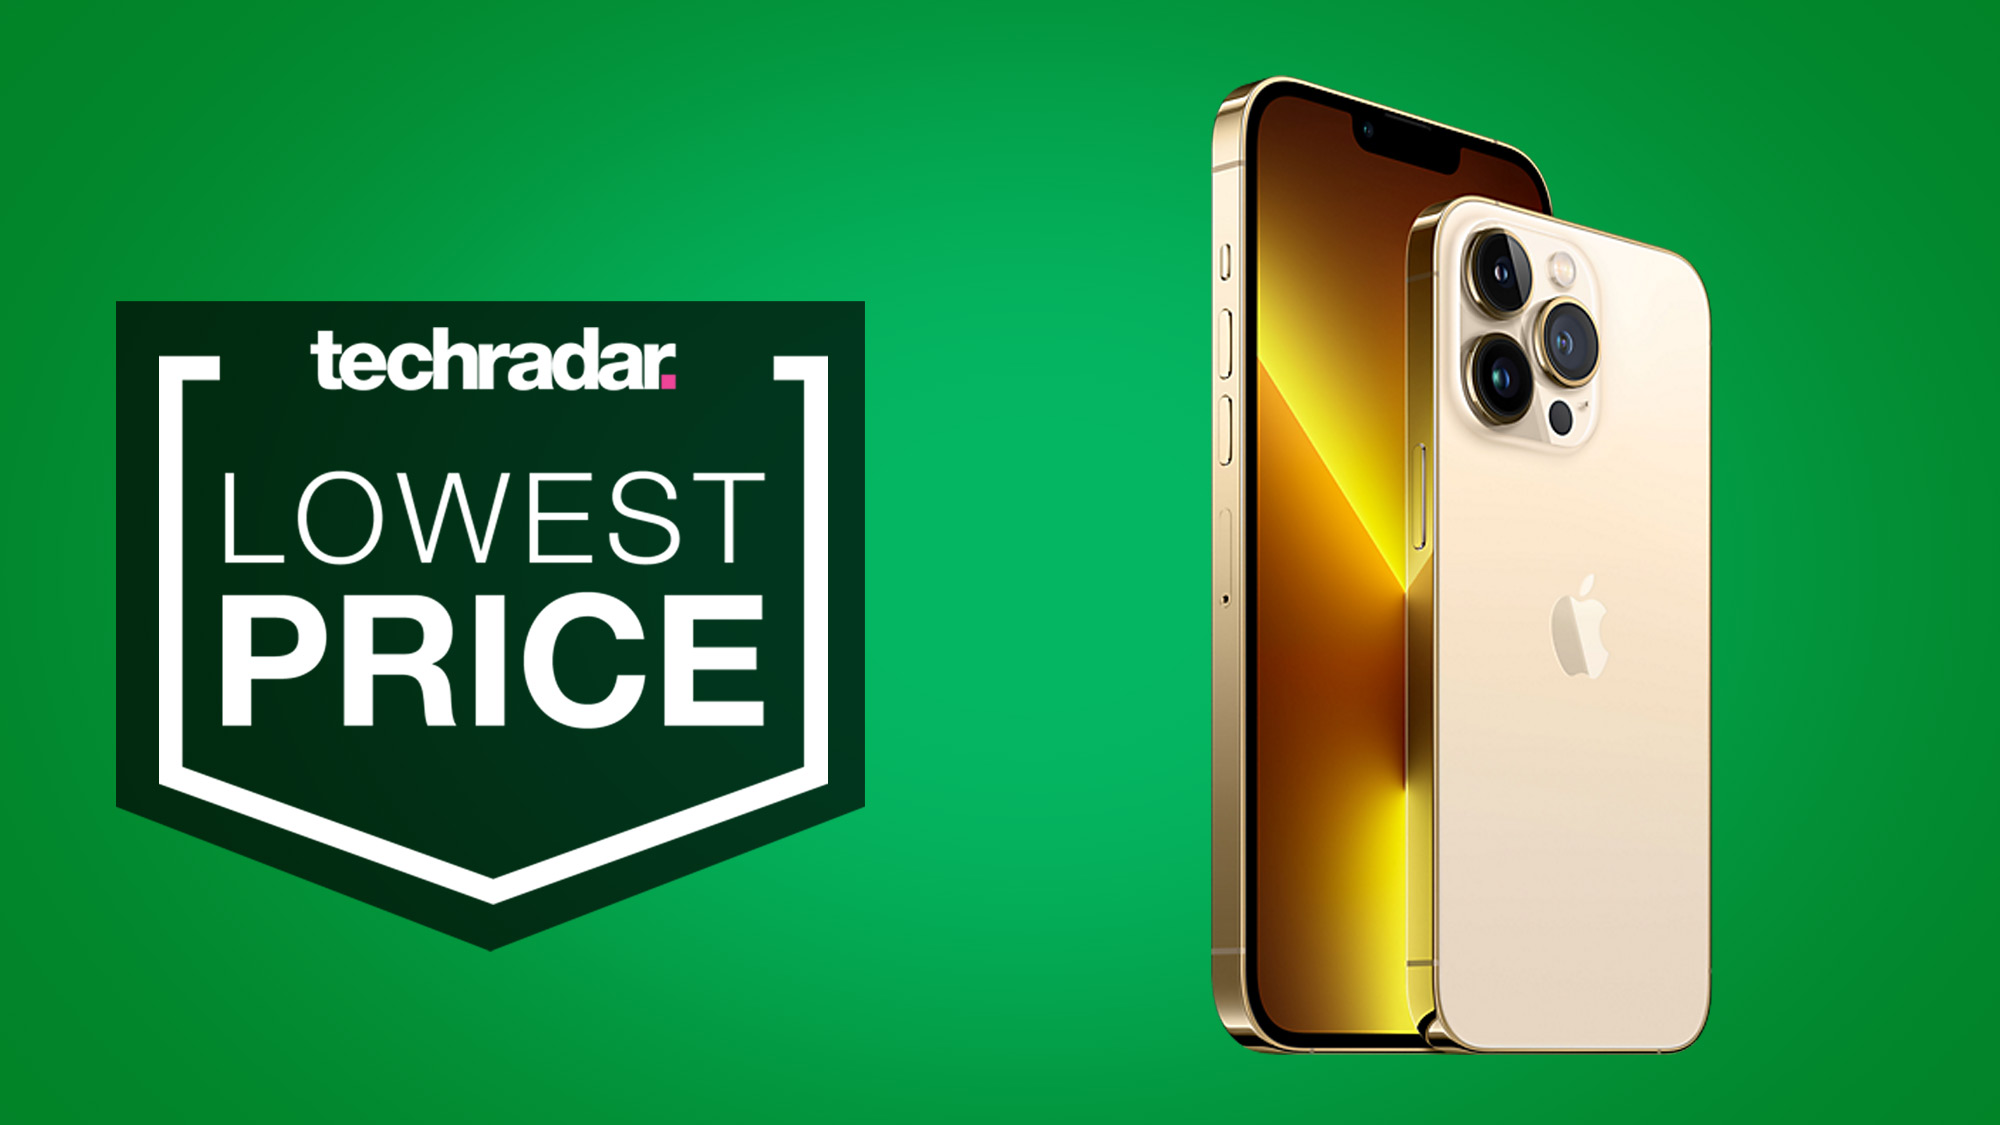 iD Mobile is offering an absolutely massive saving on the iPhone 13 Pro